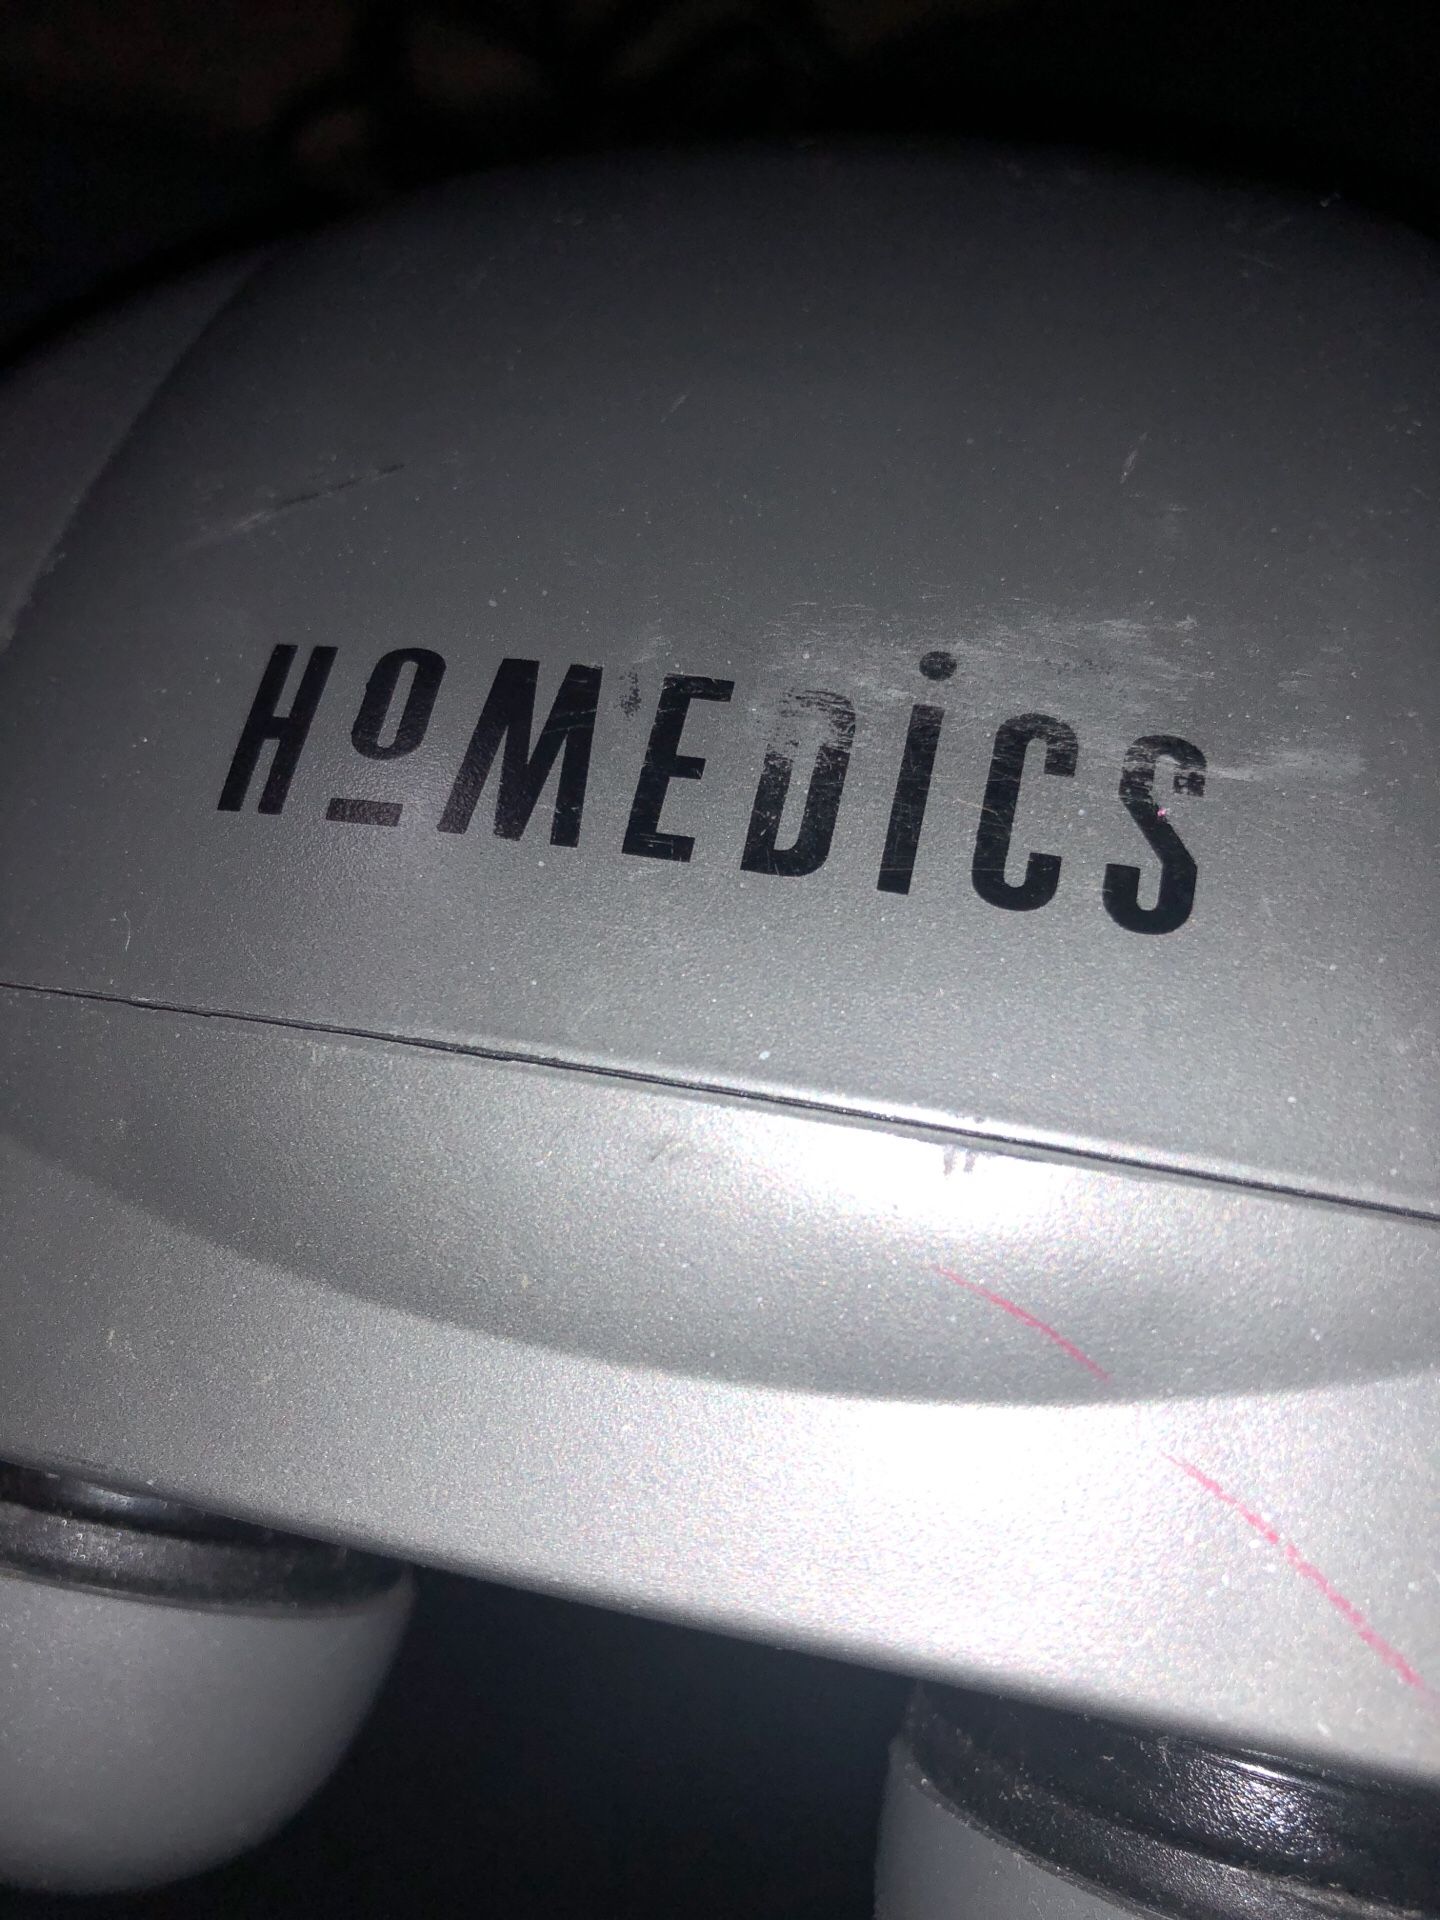 Homedics Professional Percussion Massager. Please see all the pictures and read the description